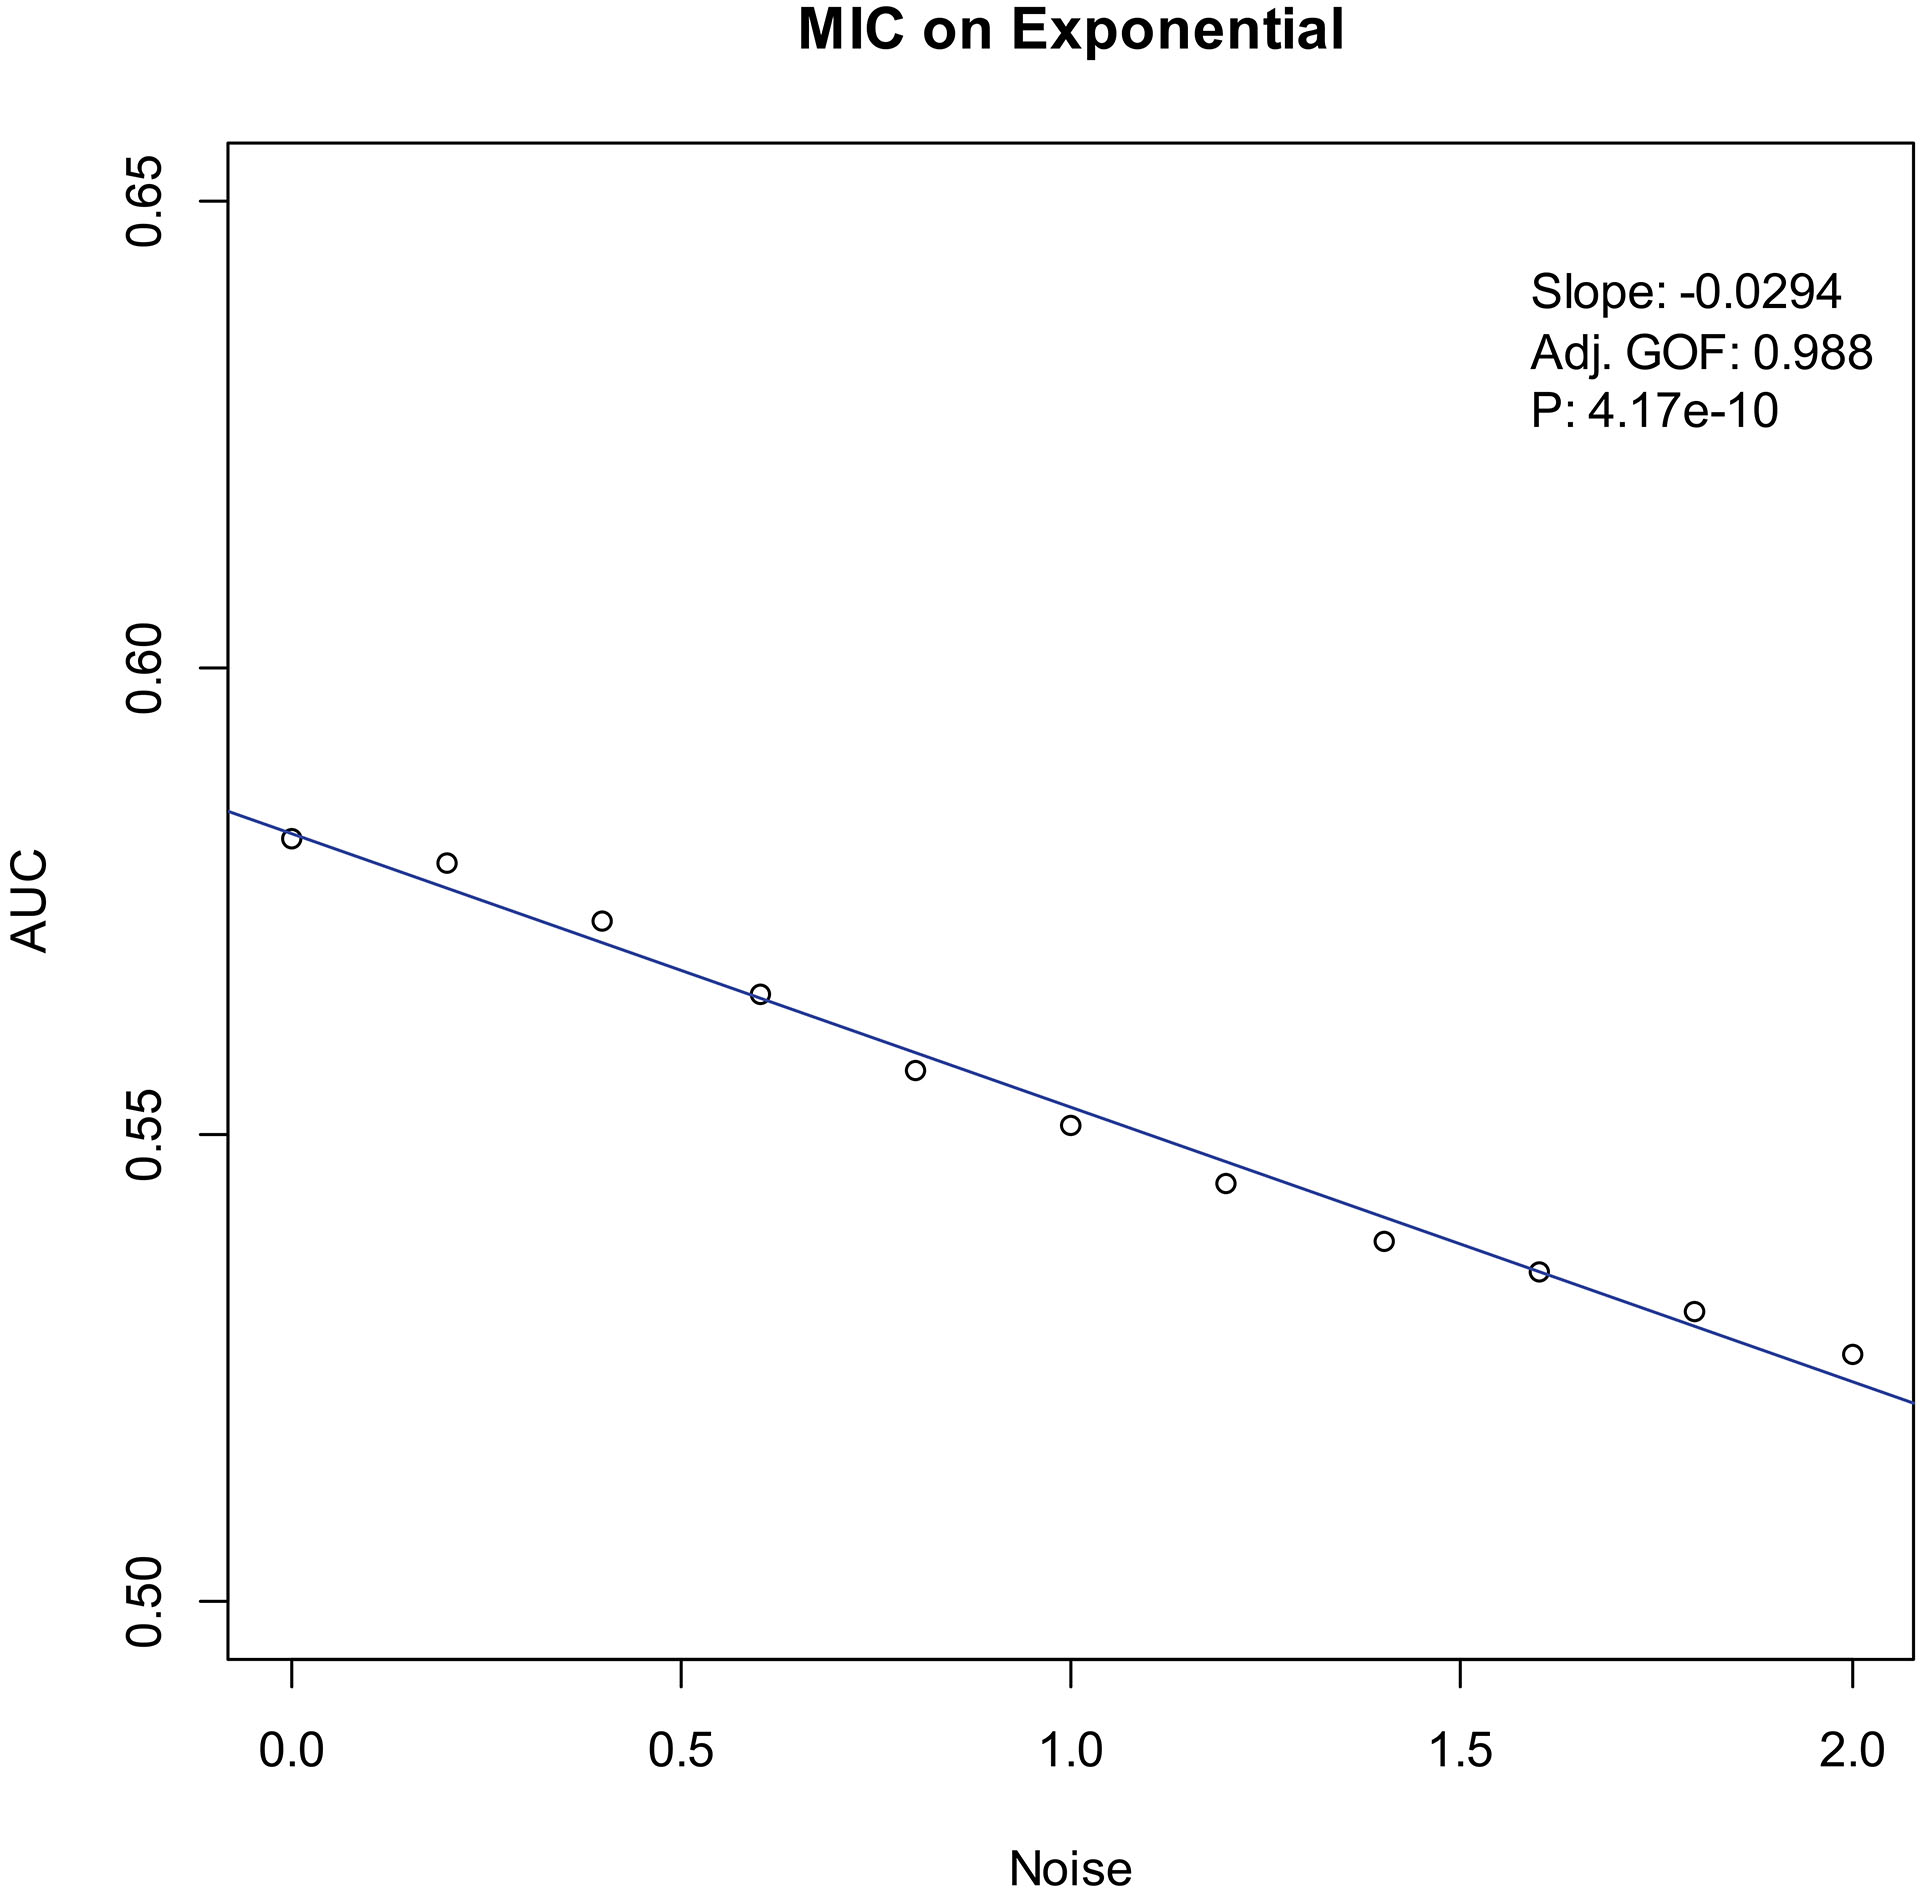 Noise-AUC plot of MIC on exponential. The line is fitted by the points. “Slope” indicates the slope of the line, “Adj. GOF” is the adjusted goodness of fit, and “P” is the P-value of the fit.